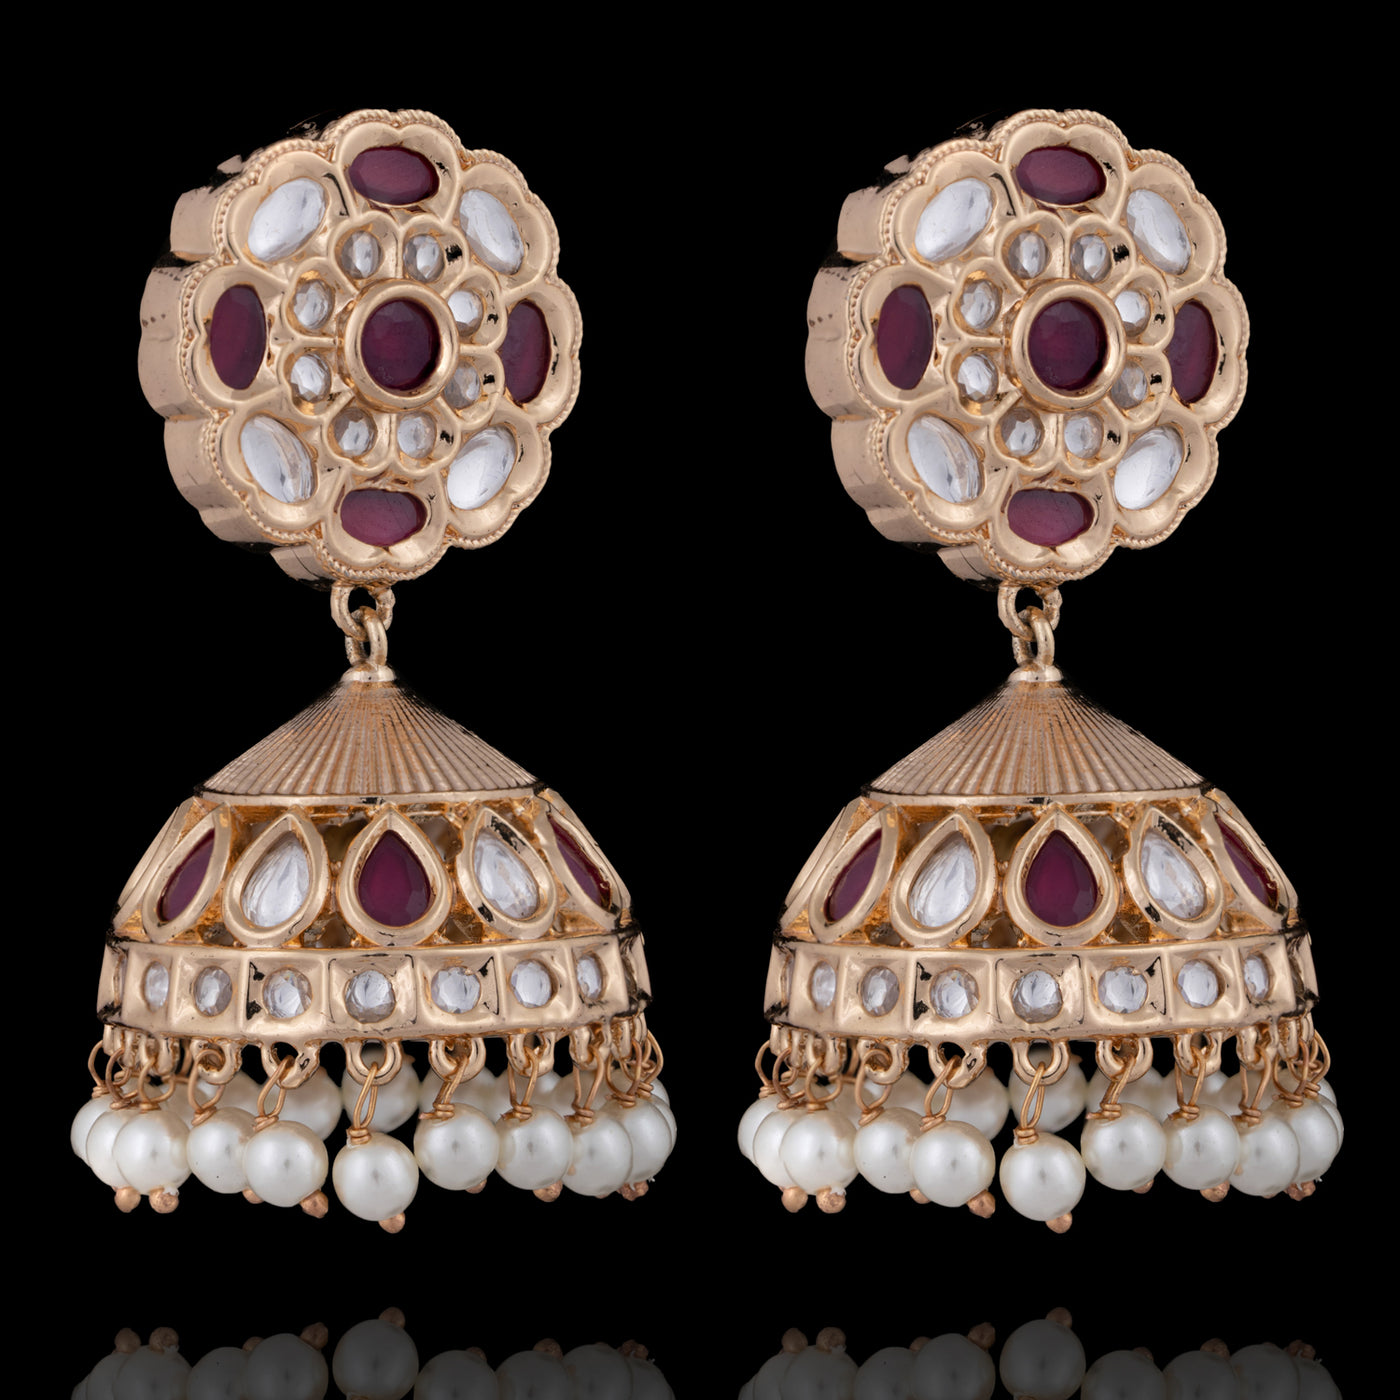 Nikki Earrings - Available in 2 Colors